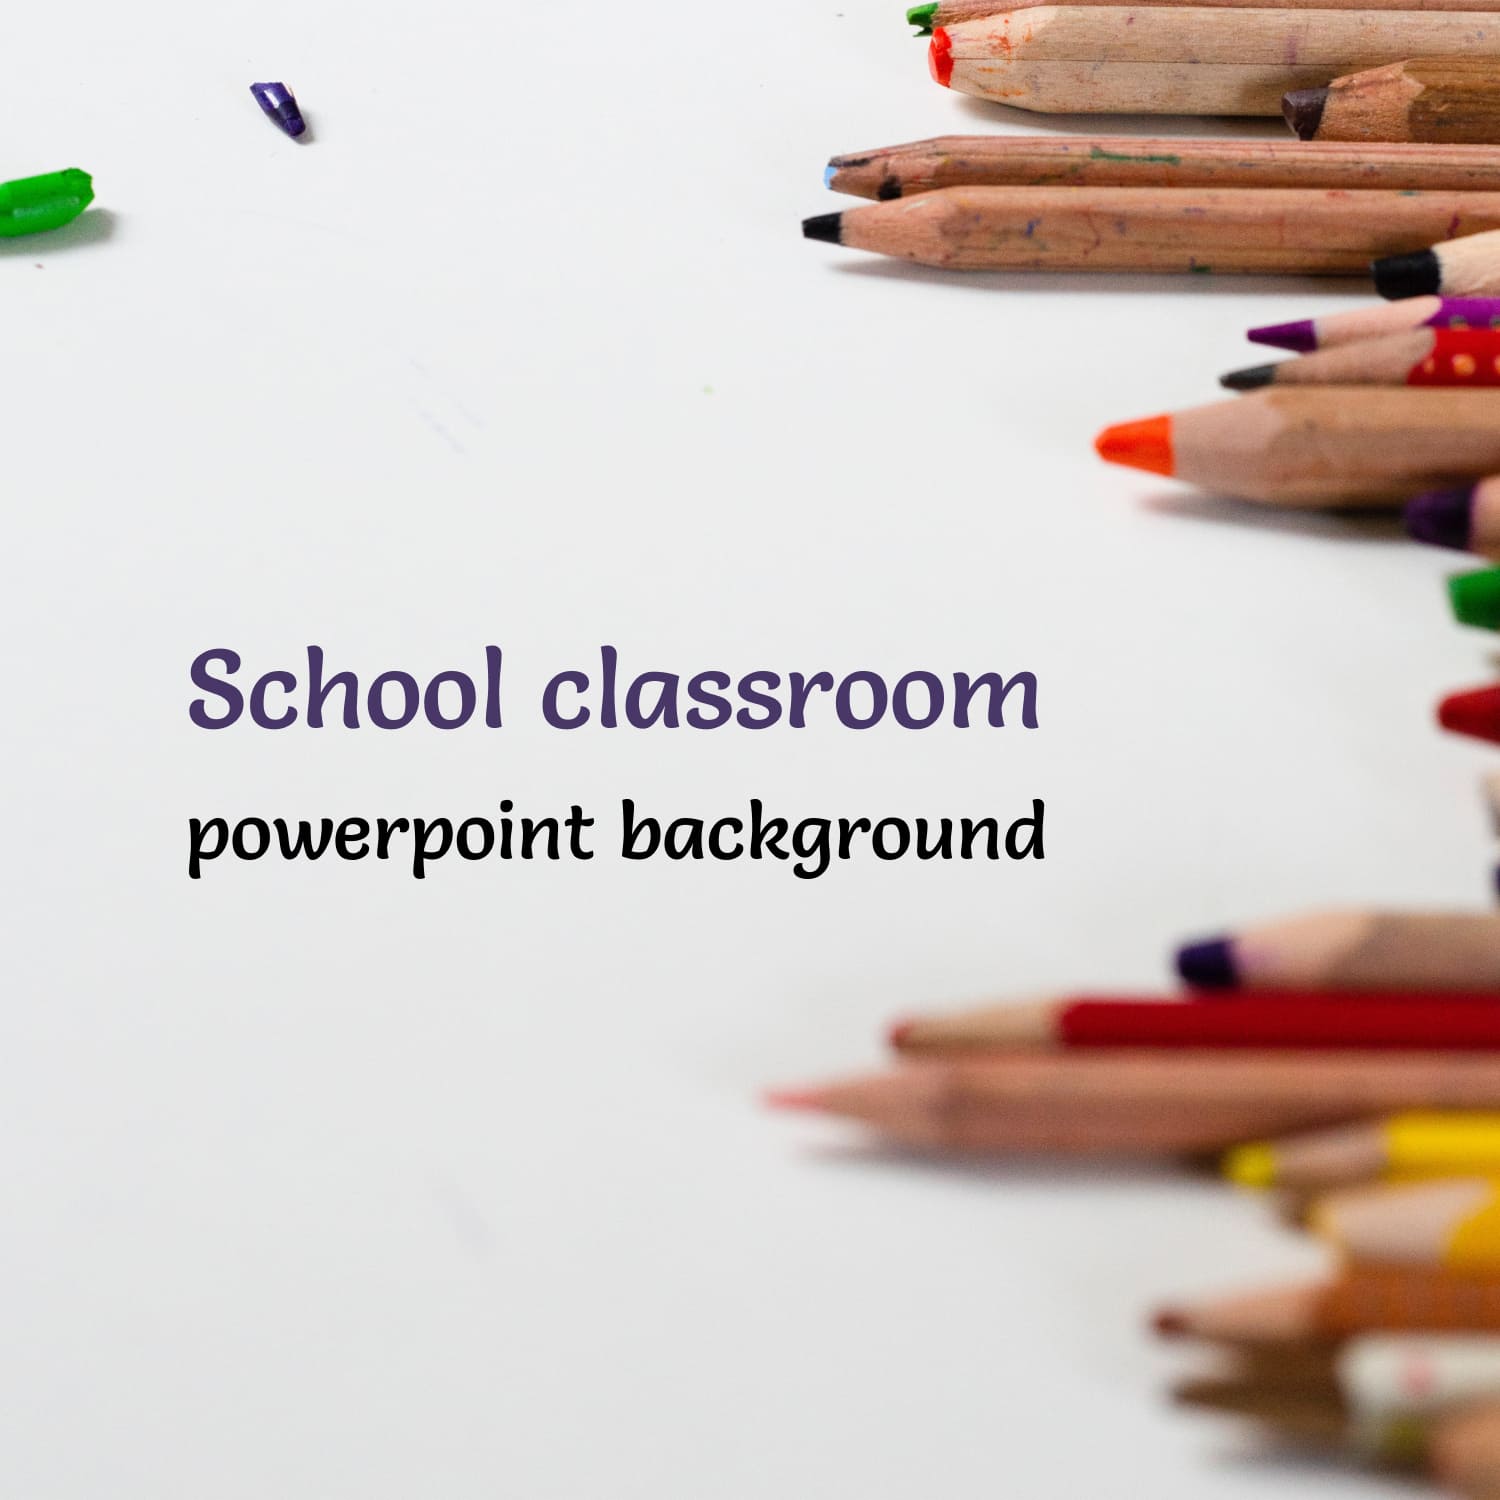 Preview School Classroom Powerpoint Background 1500x1500 1.